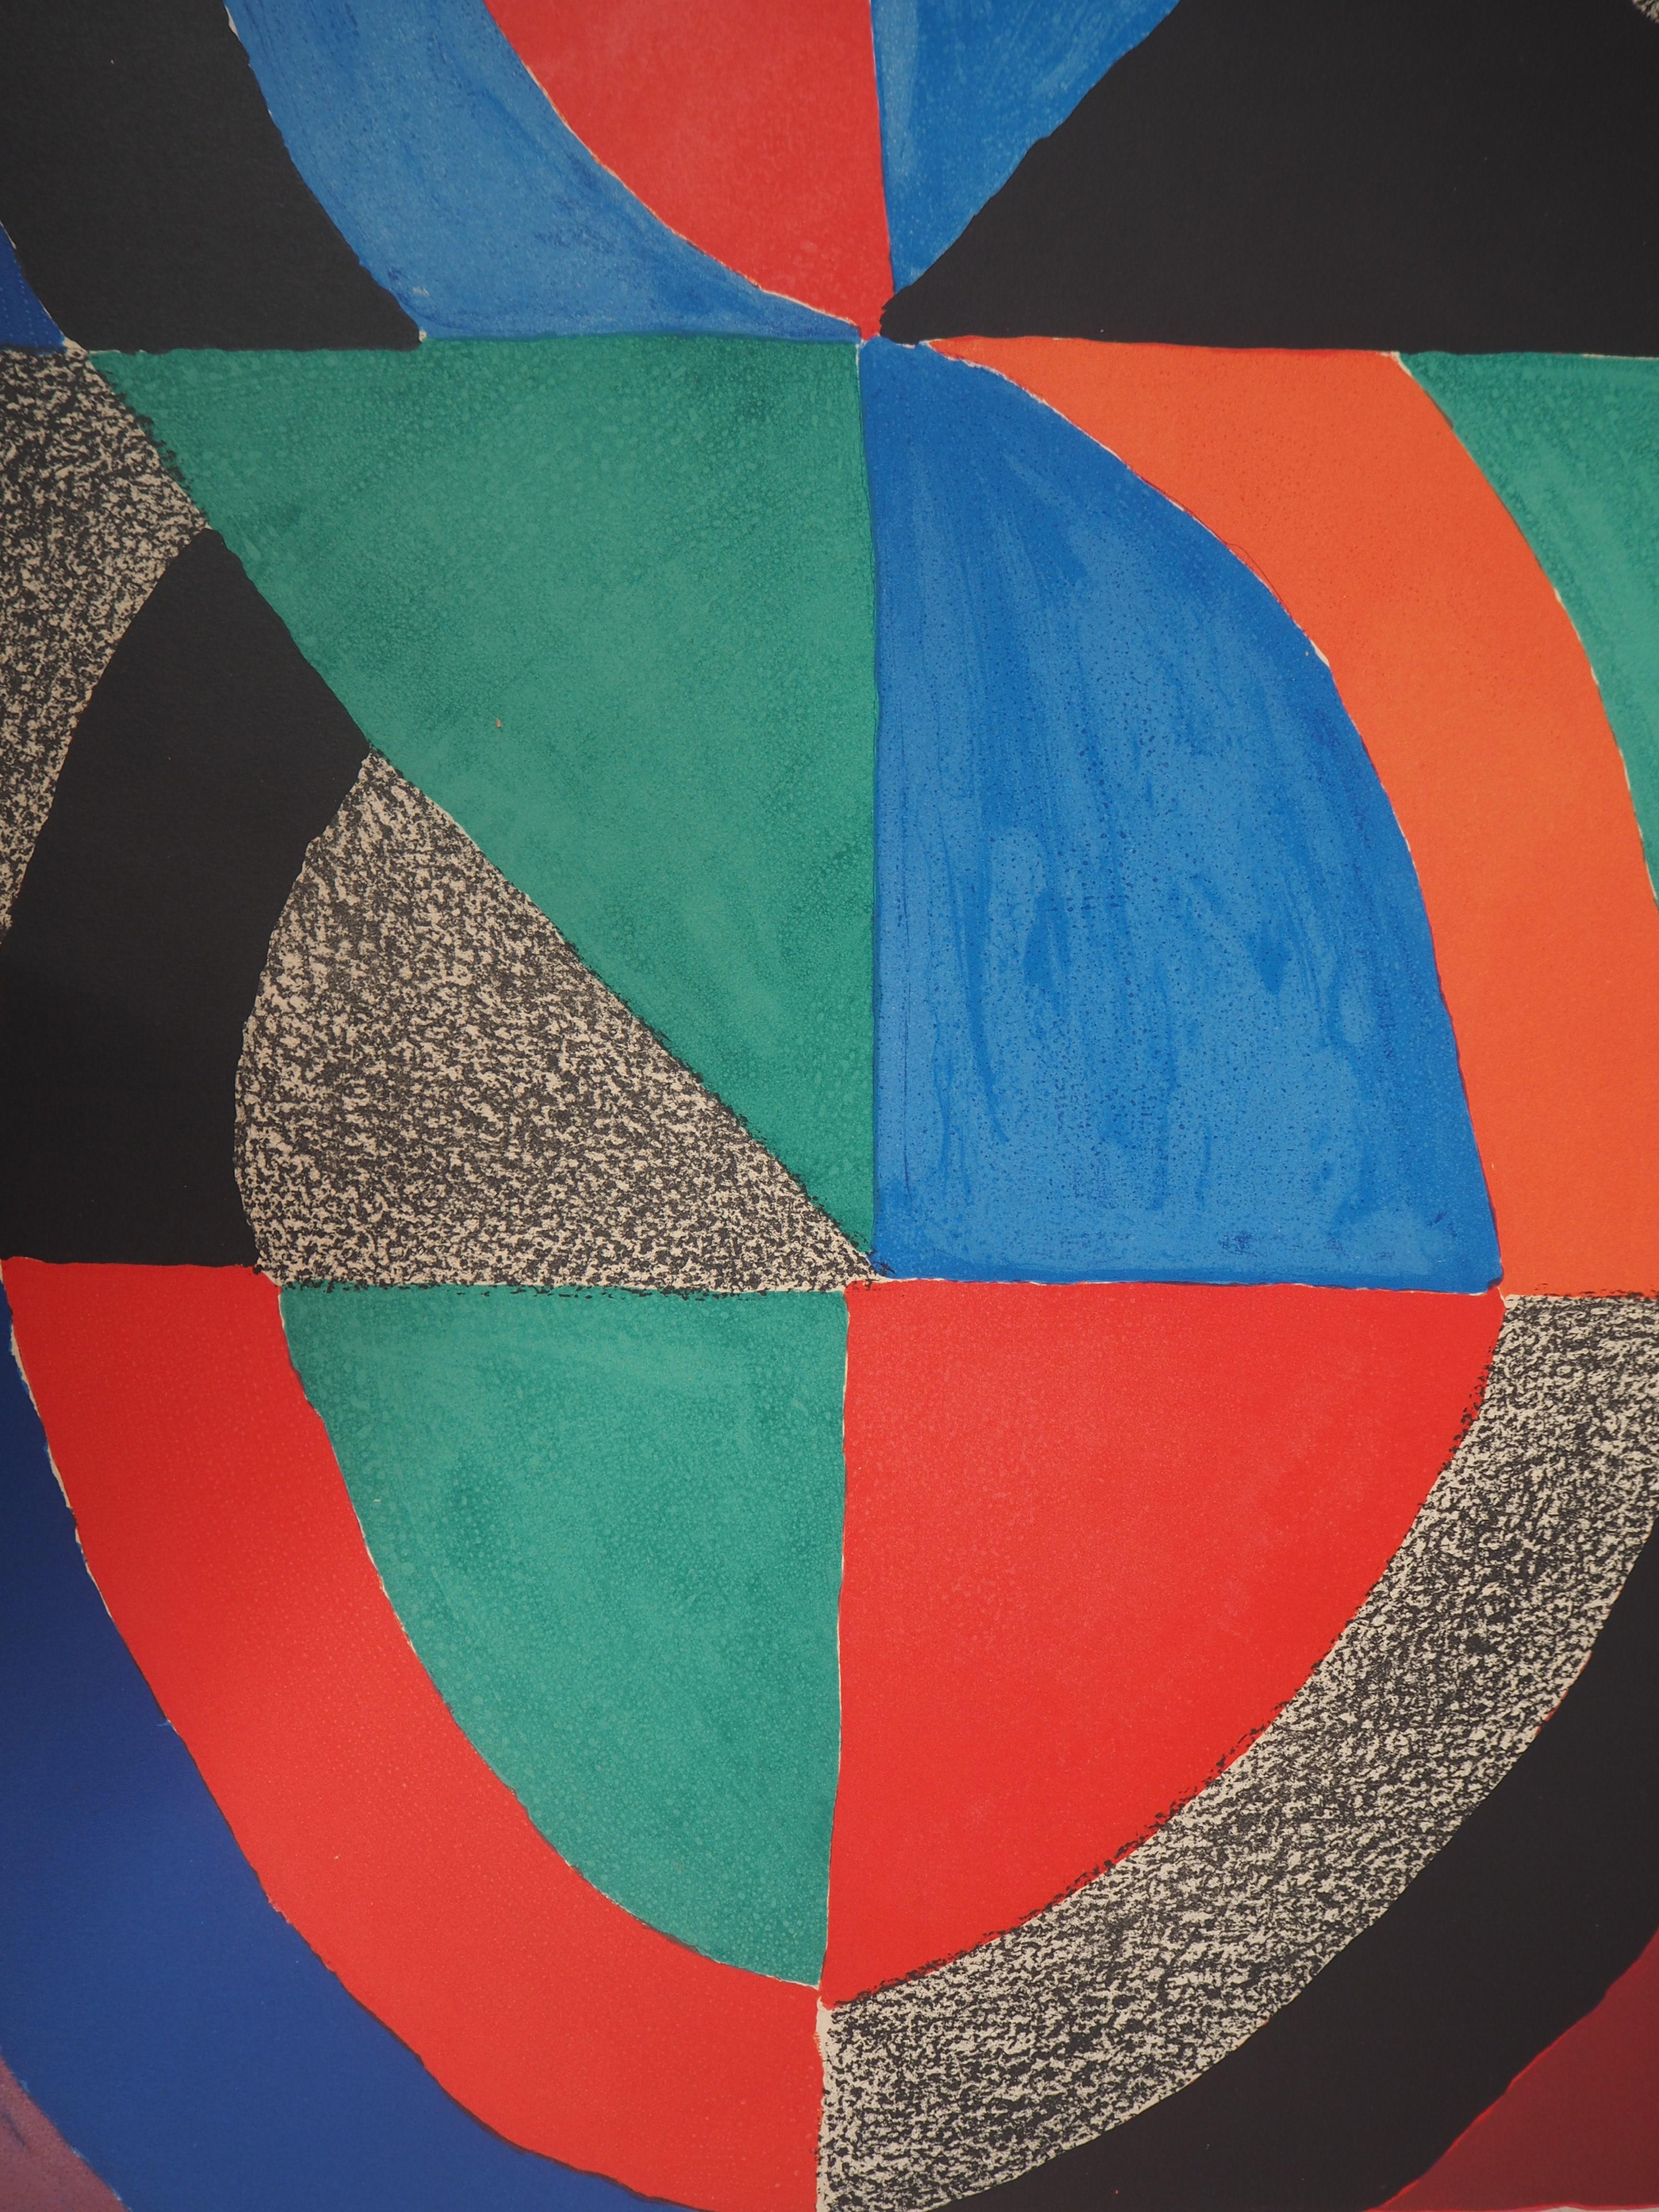 Rythm and colors (Tall Icon) - Original lithograph, Handsigned - Abstract Print by Sonia Delaunay